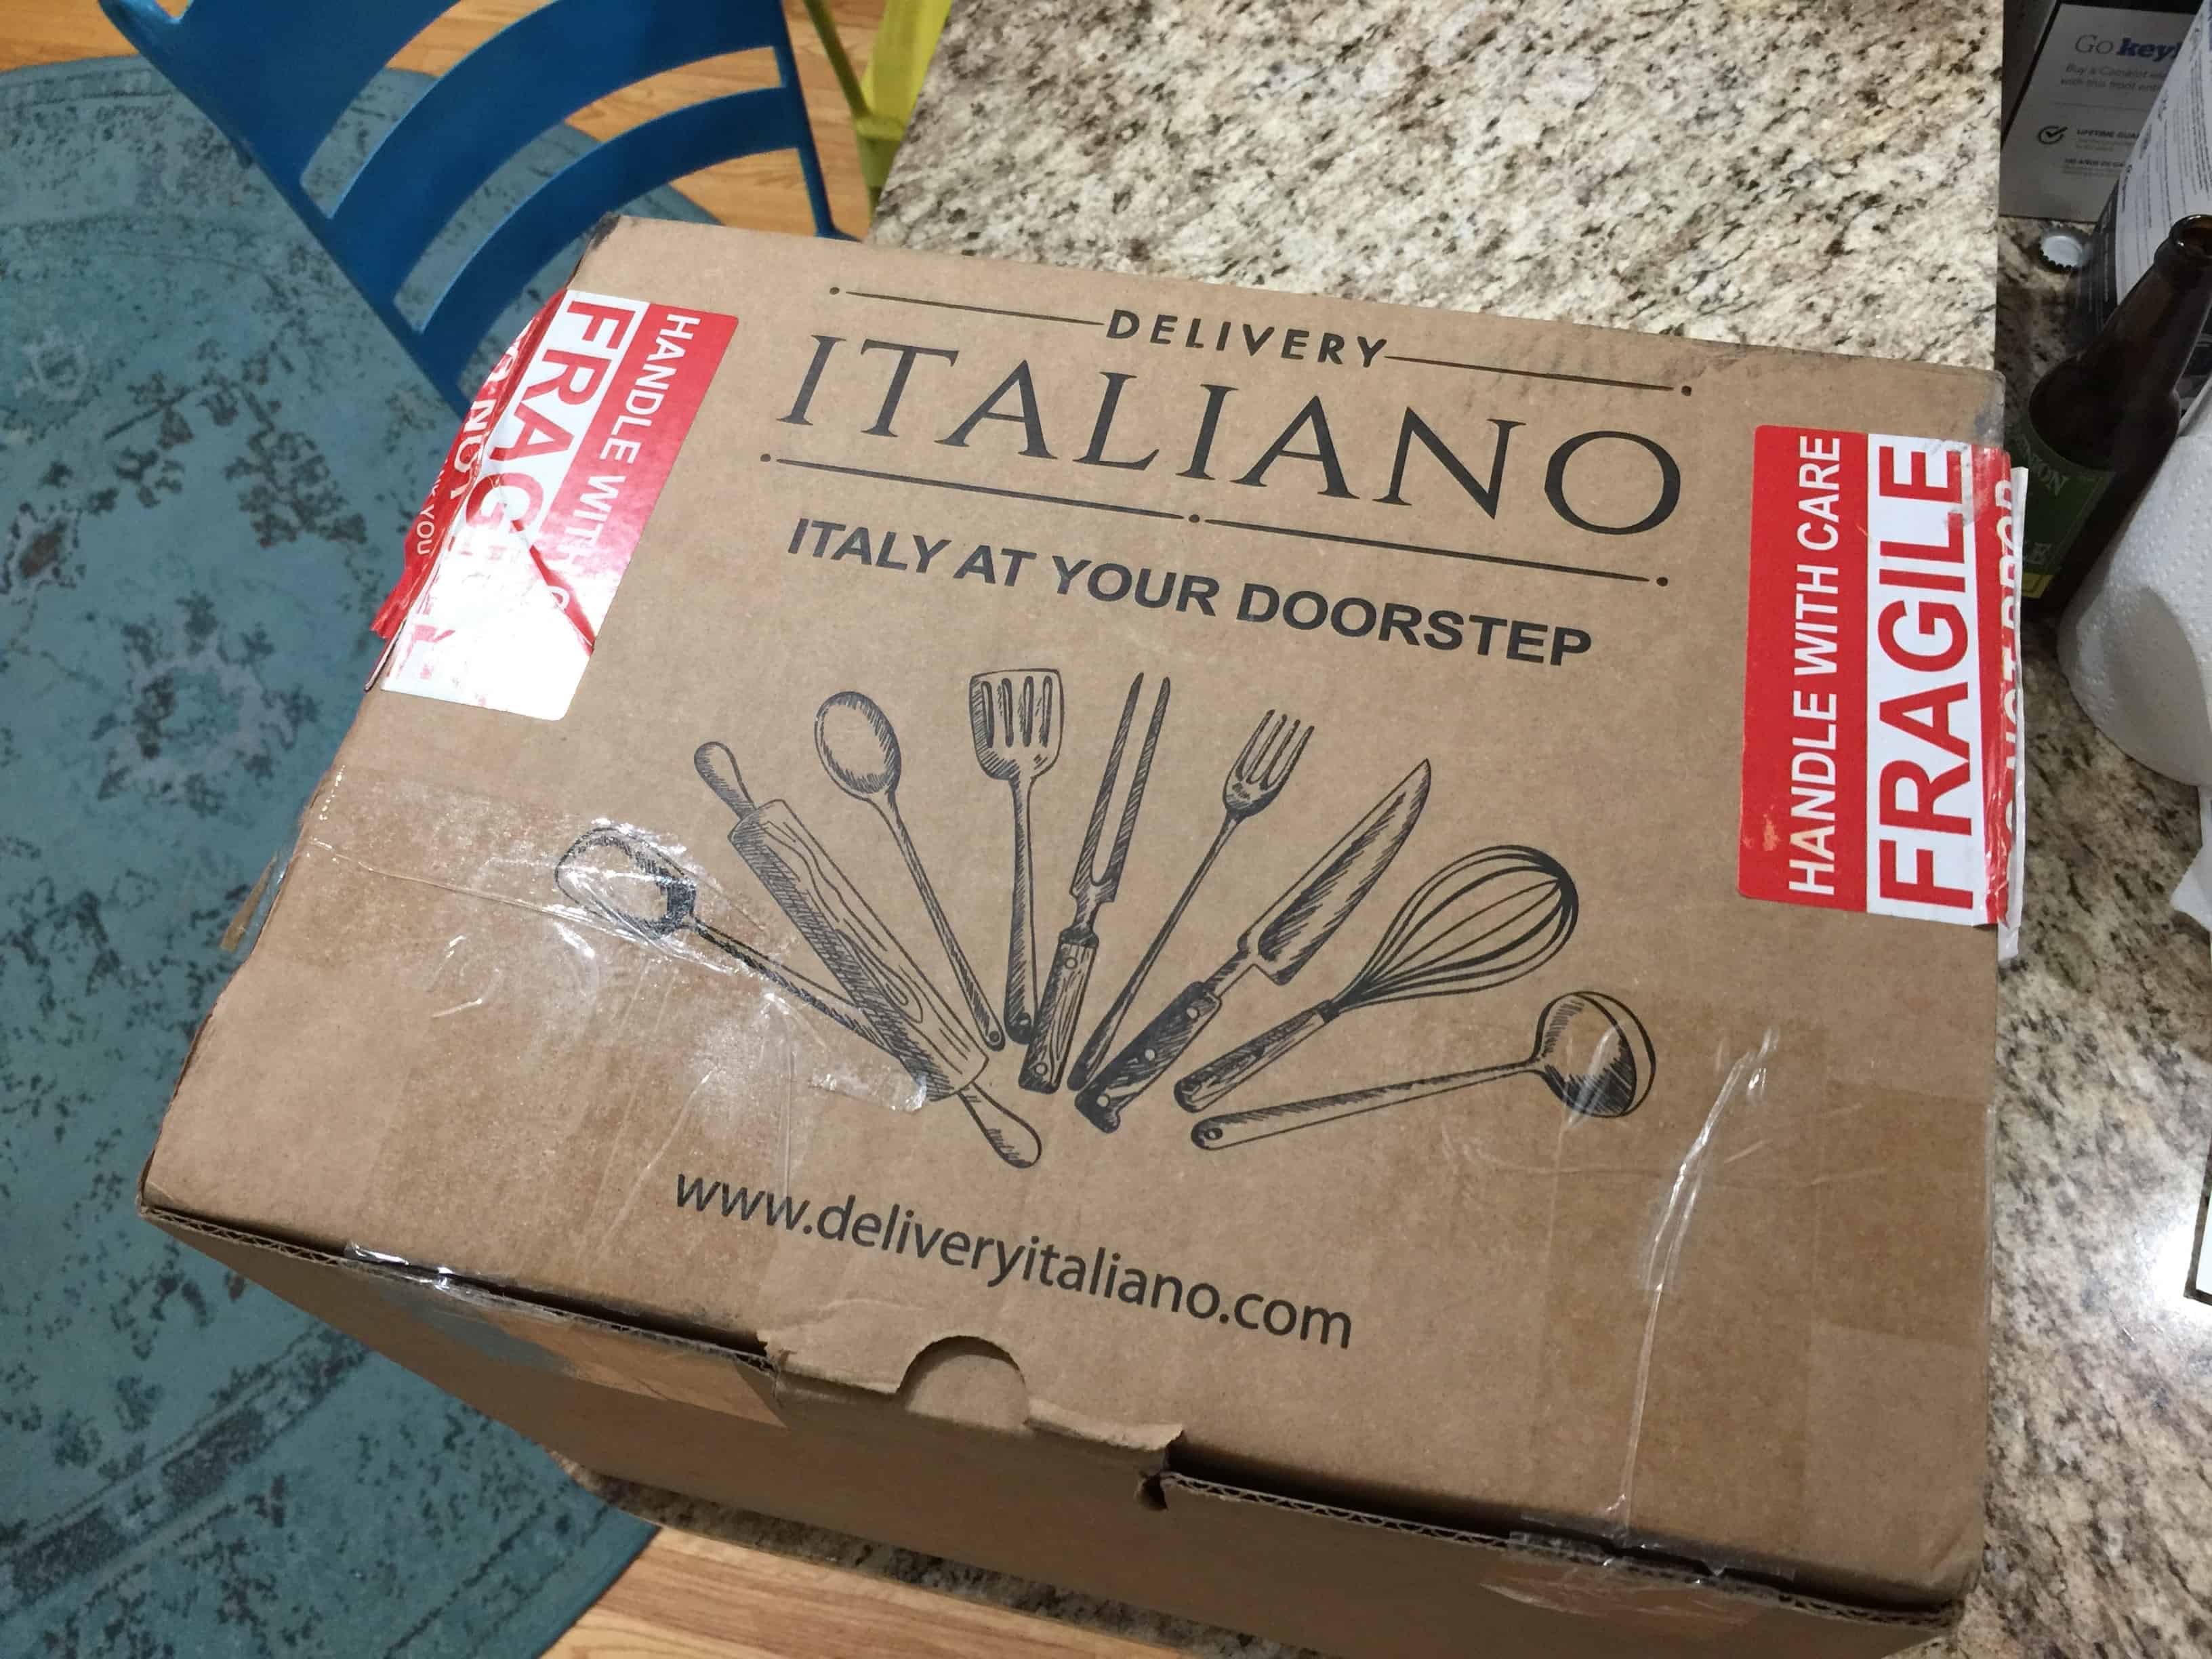 Saved by Scottie Delivery Italiano box delivery